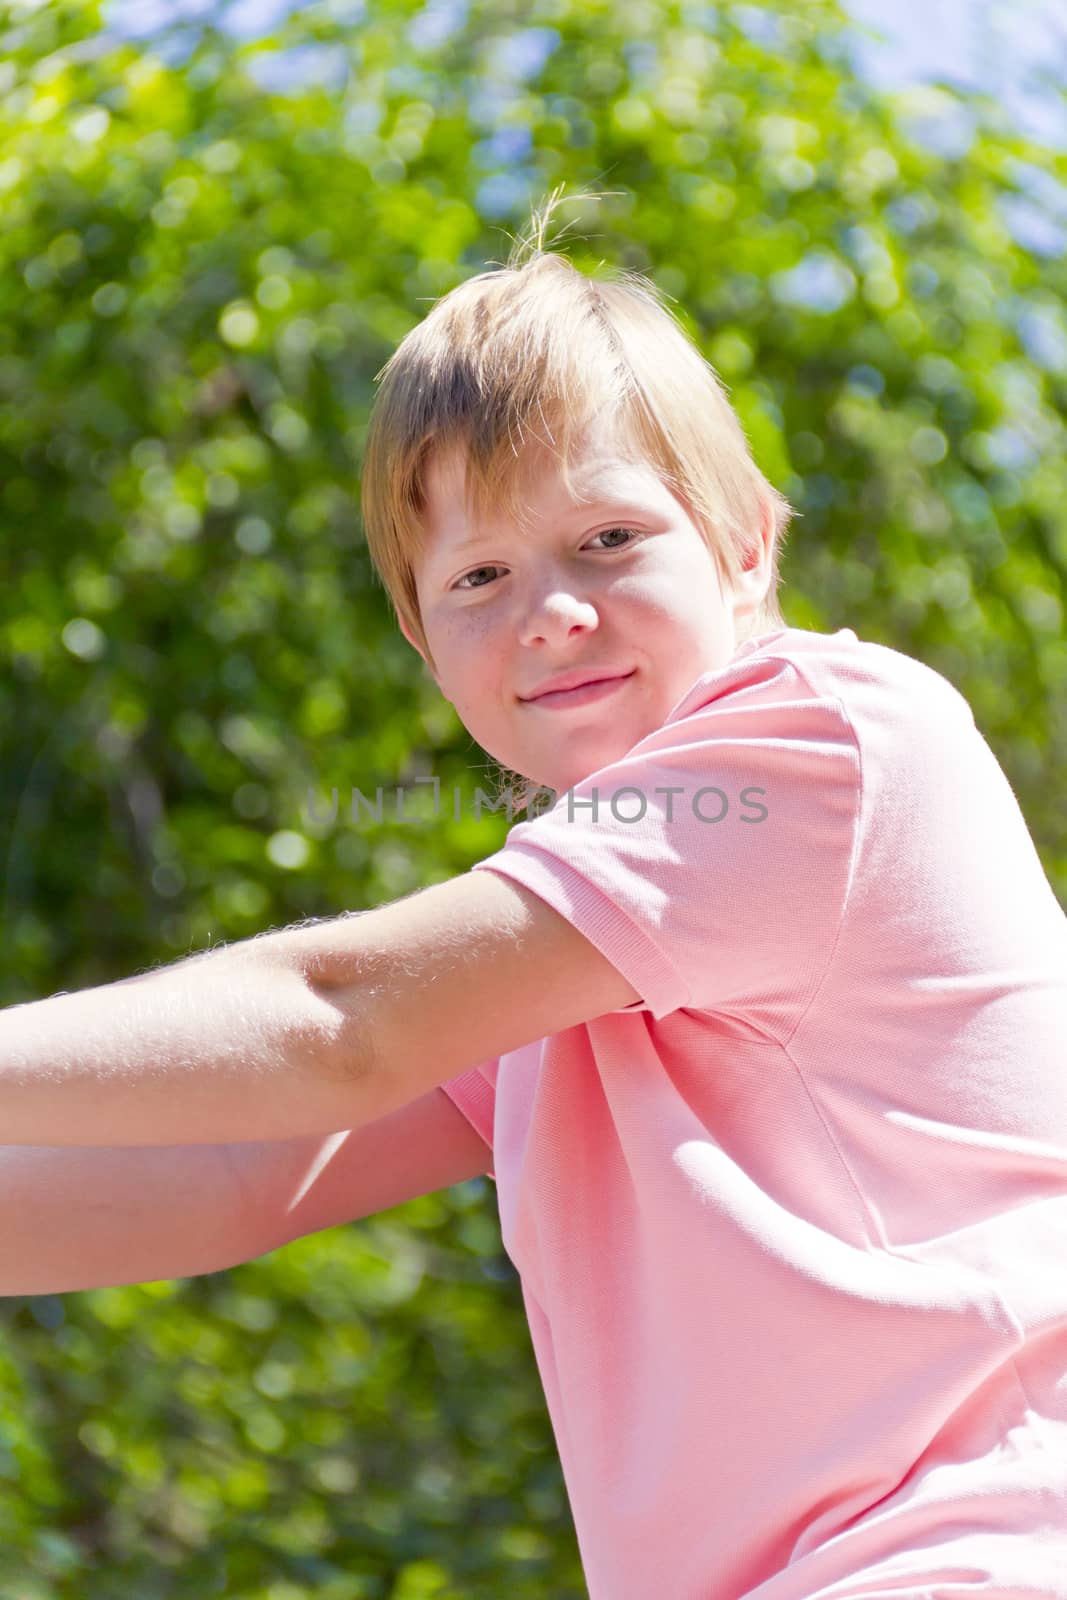 Smiling boy in pink shirt playing on stone wall